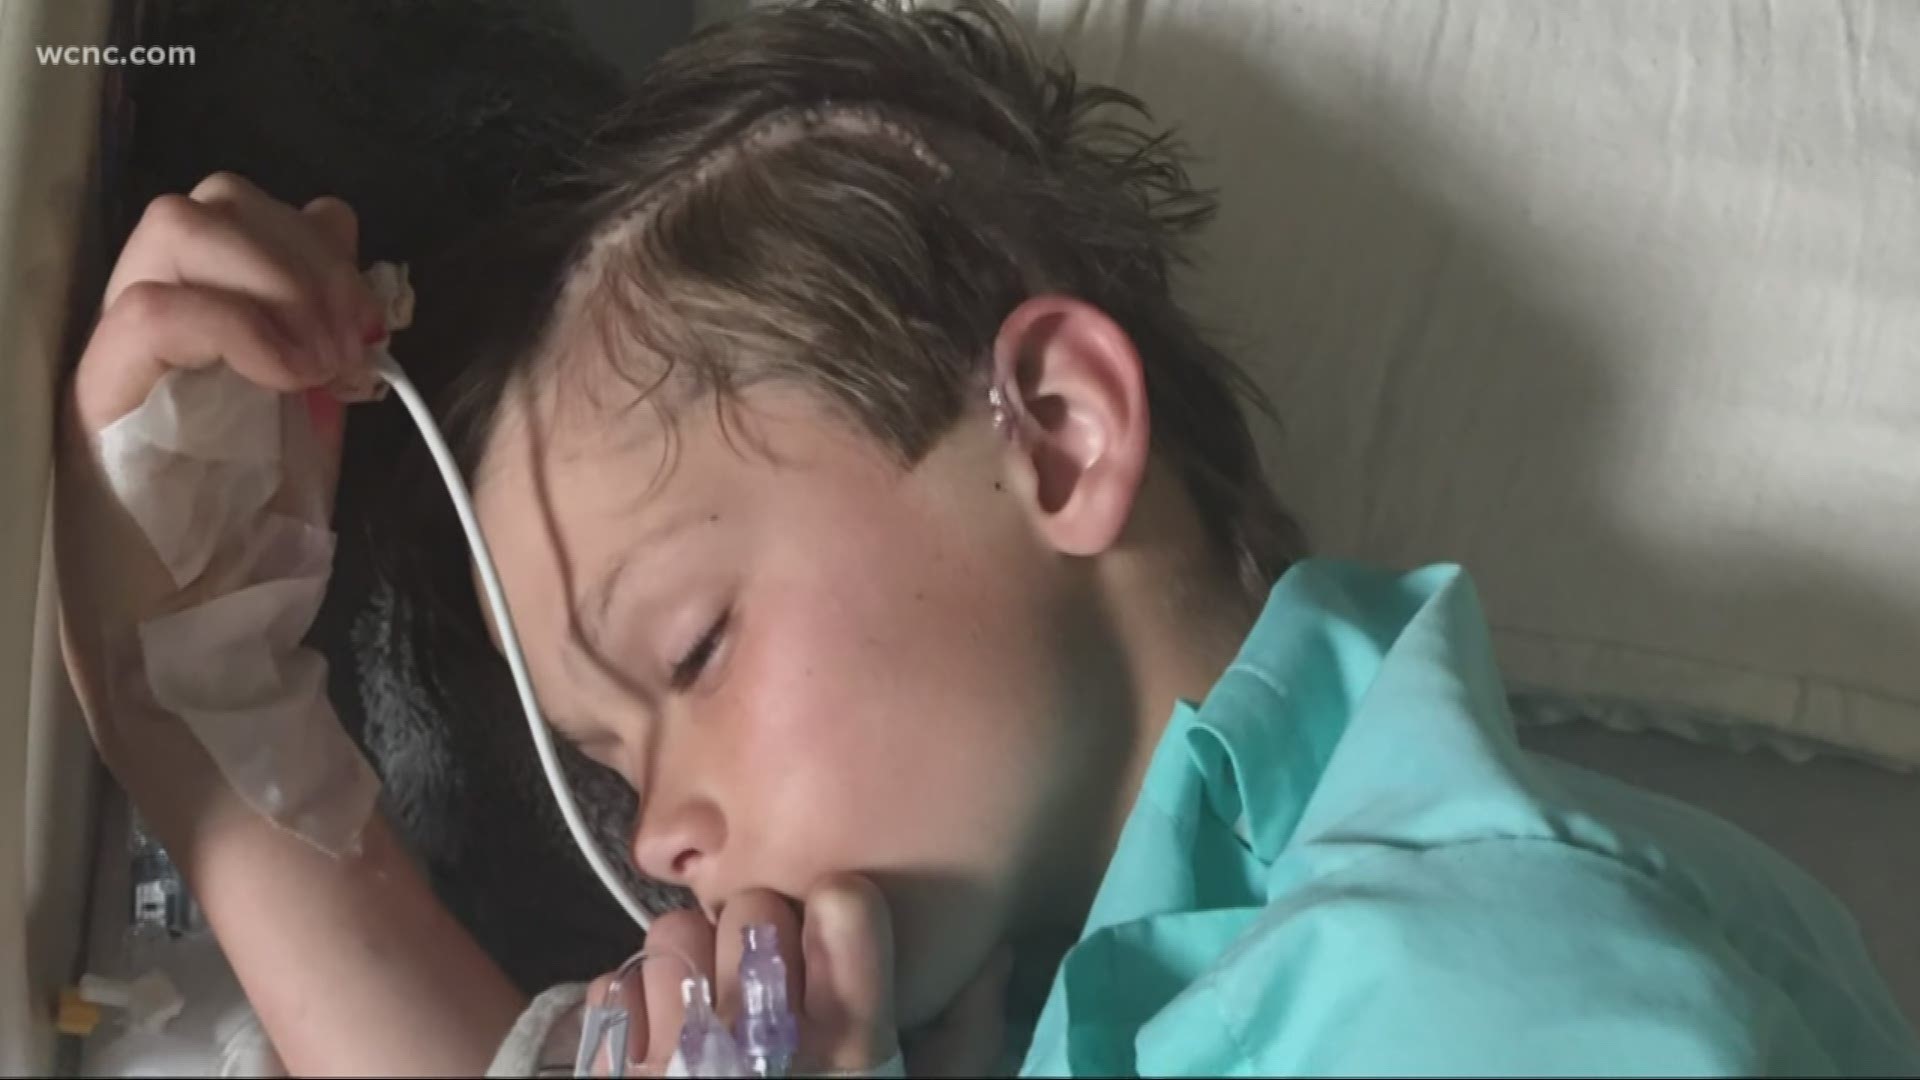 It all started last May, when Sammy began having headaches. At first, his family and doctors thought the 10-year-old was suffering from migraines.